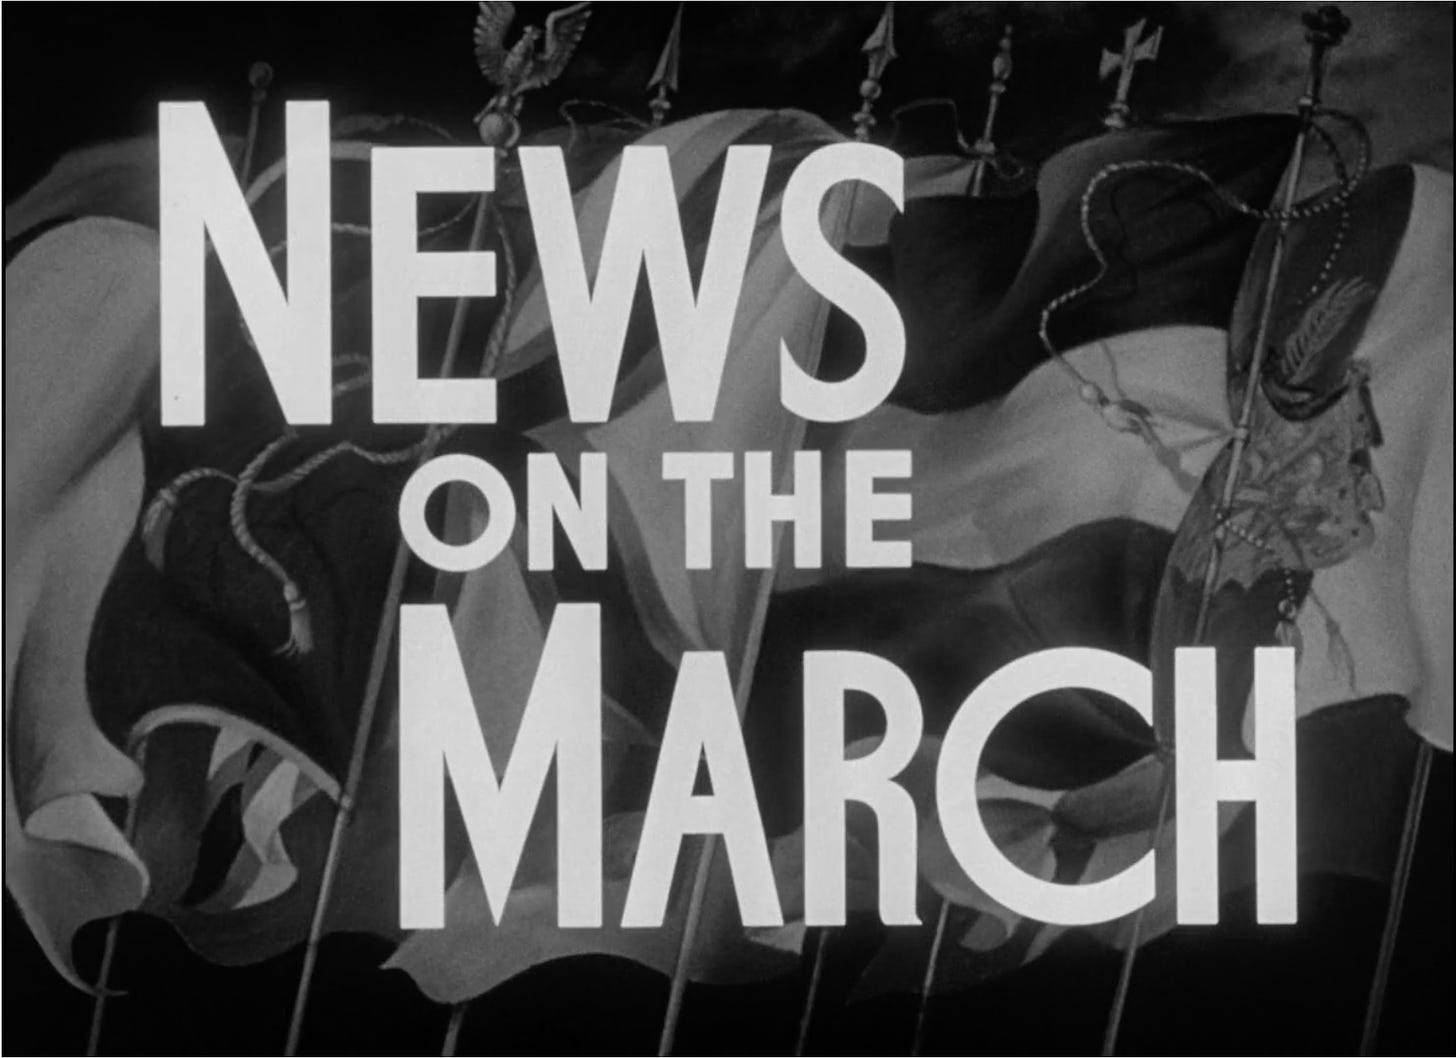 "NEWS ON THE MARCH" title card from Citizen Kane